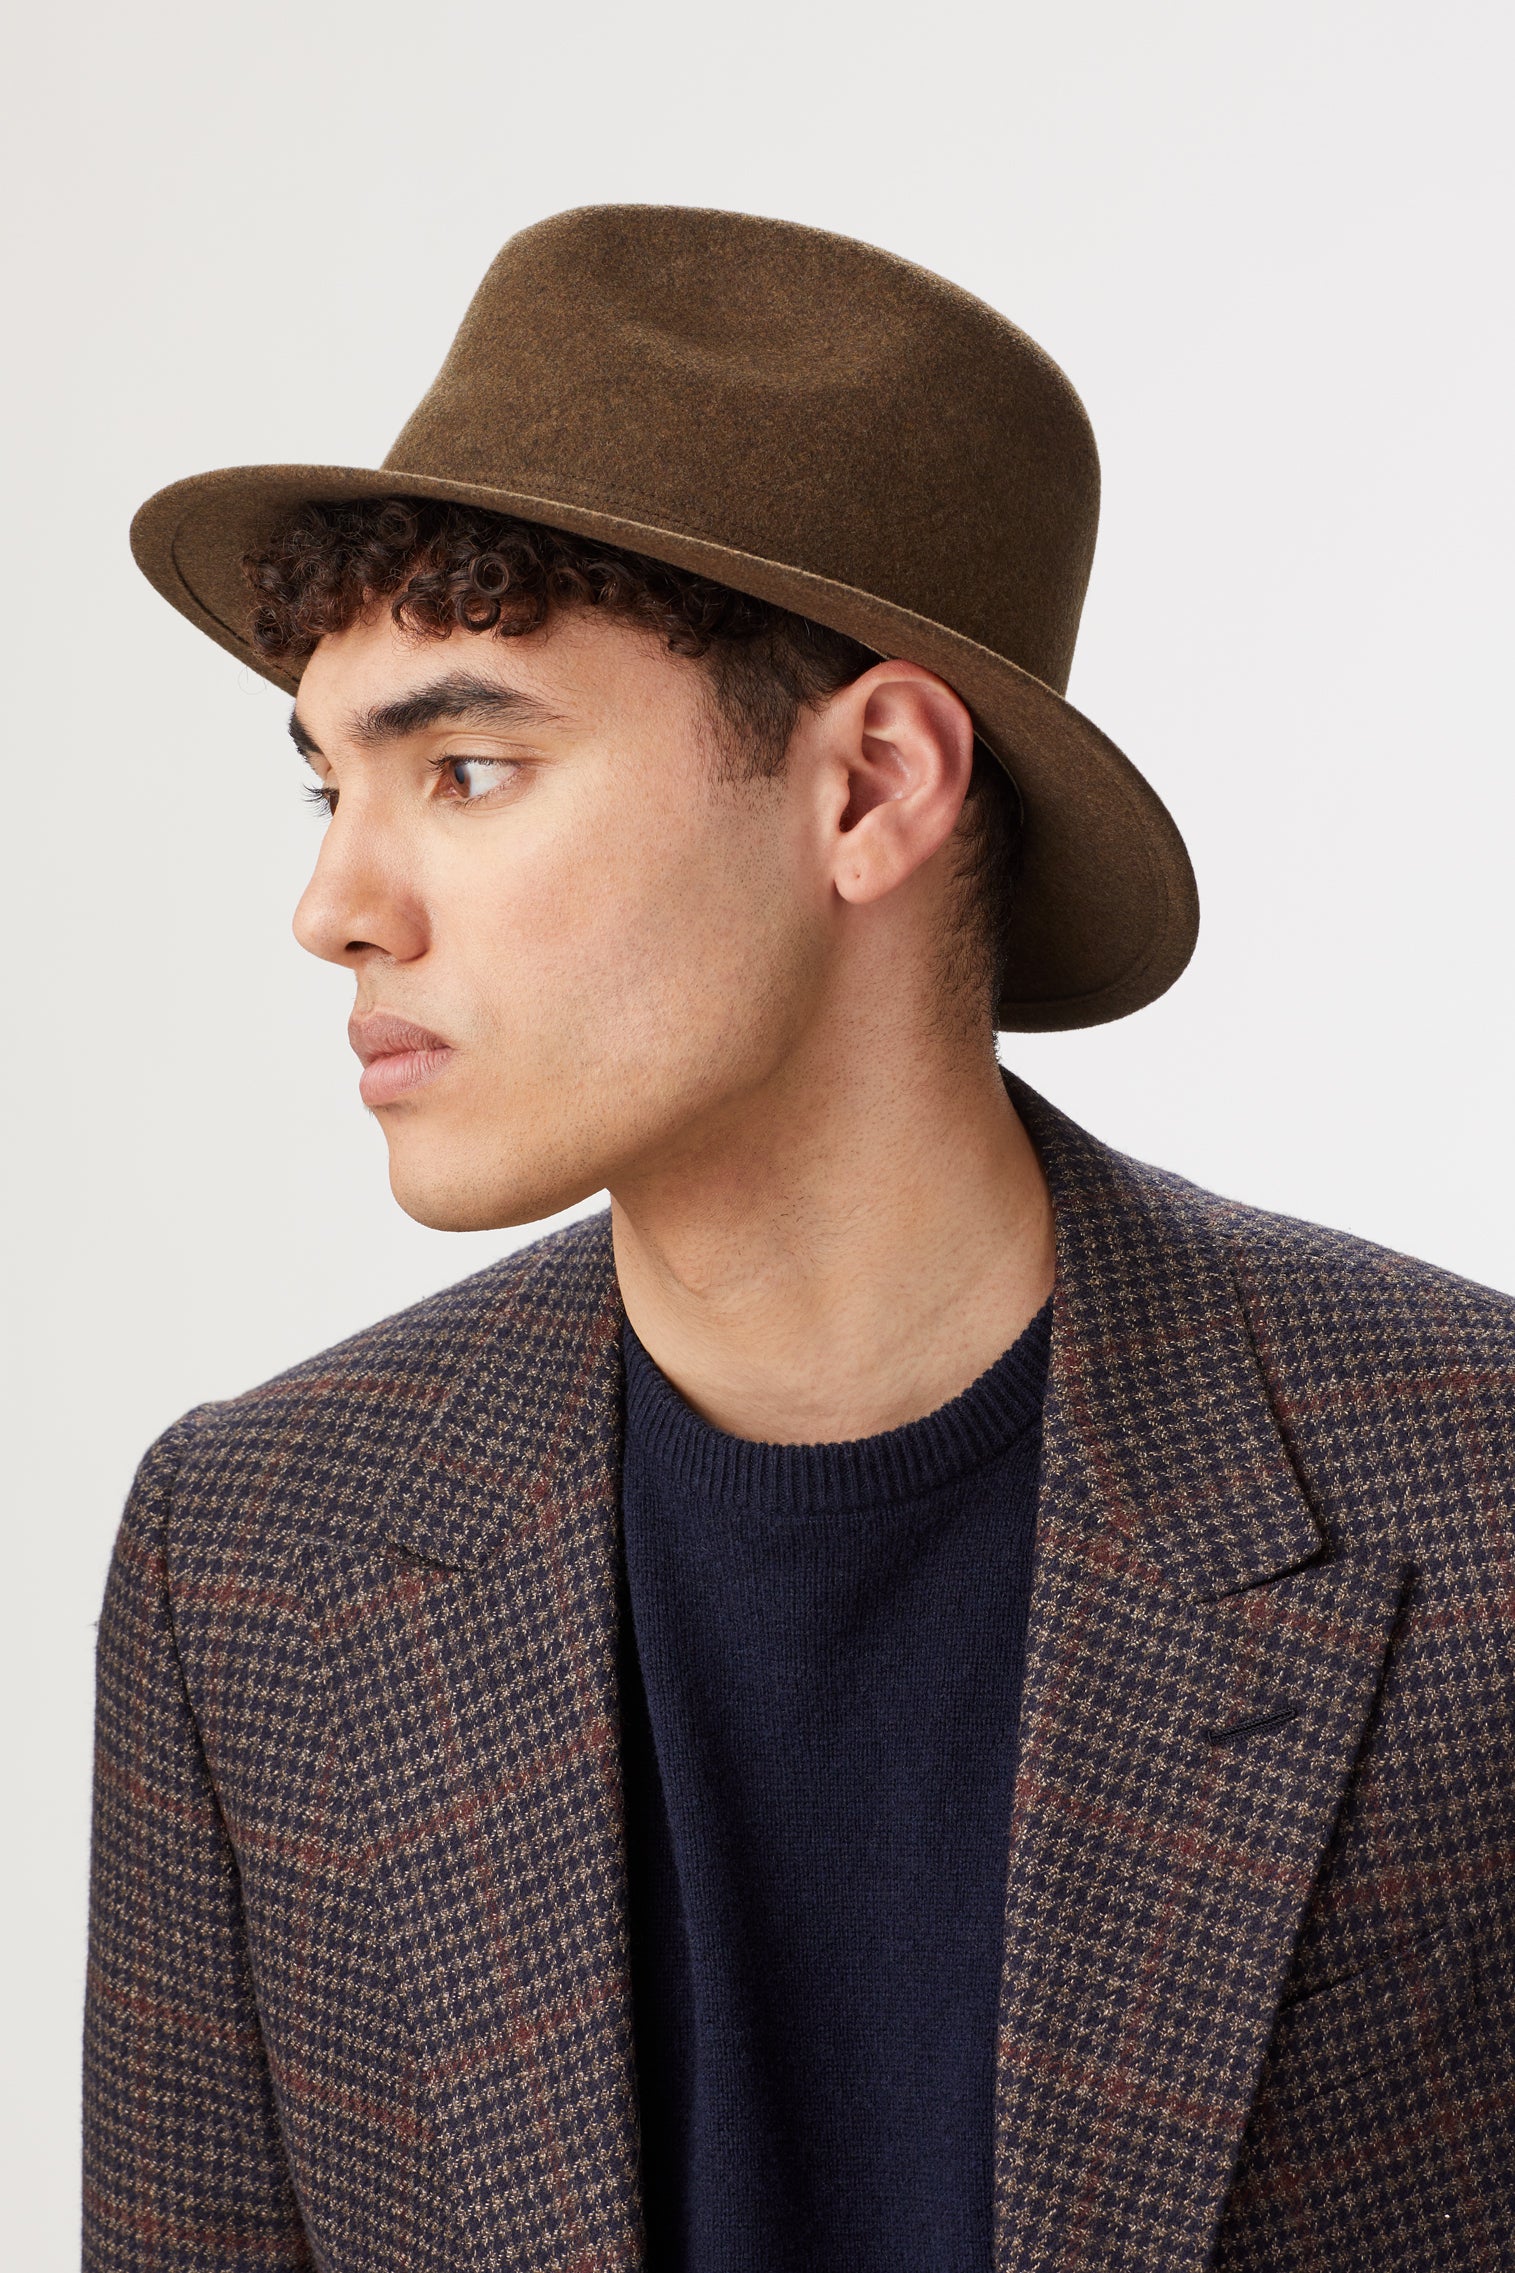 Rambler Rollable Trilby - Hats for Heart-shaped Face Shapes - Lock & Co. Hatters London UK